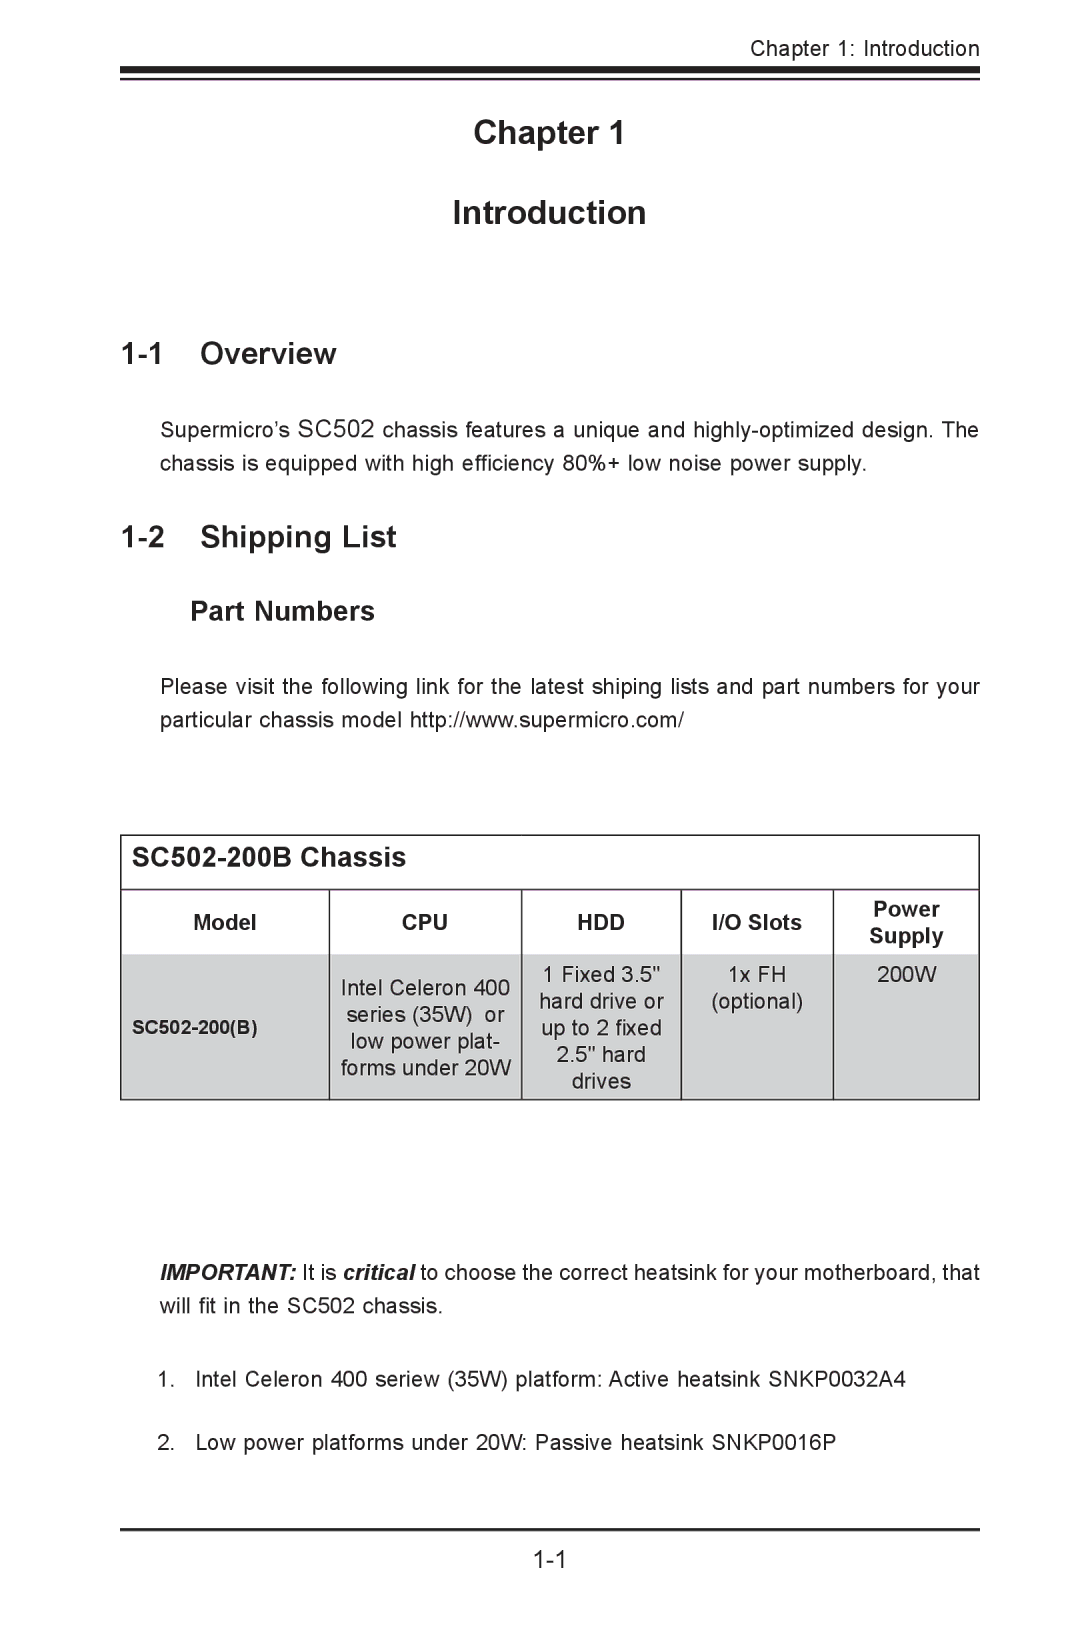 SUPER MICRO Computer user manual Chapter Introduction, Overview, Shipping List, Part Numbers SC502-200B Chassis 